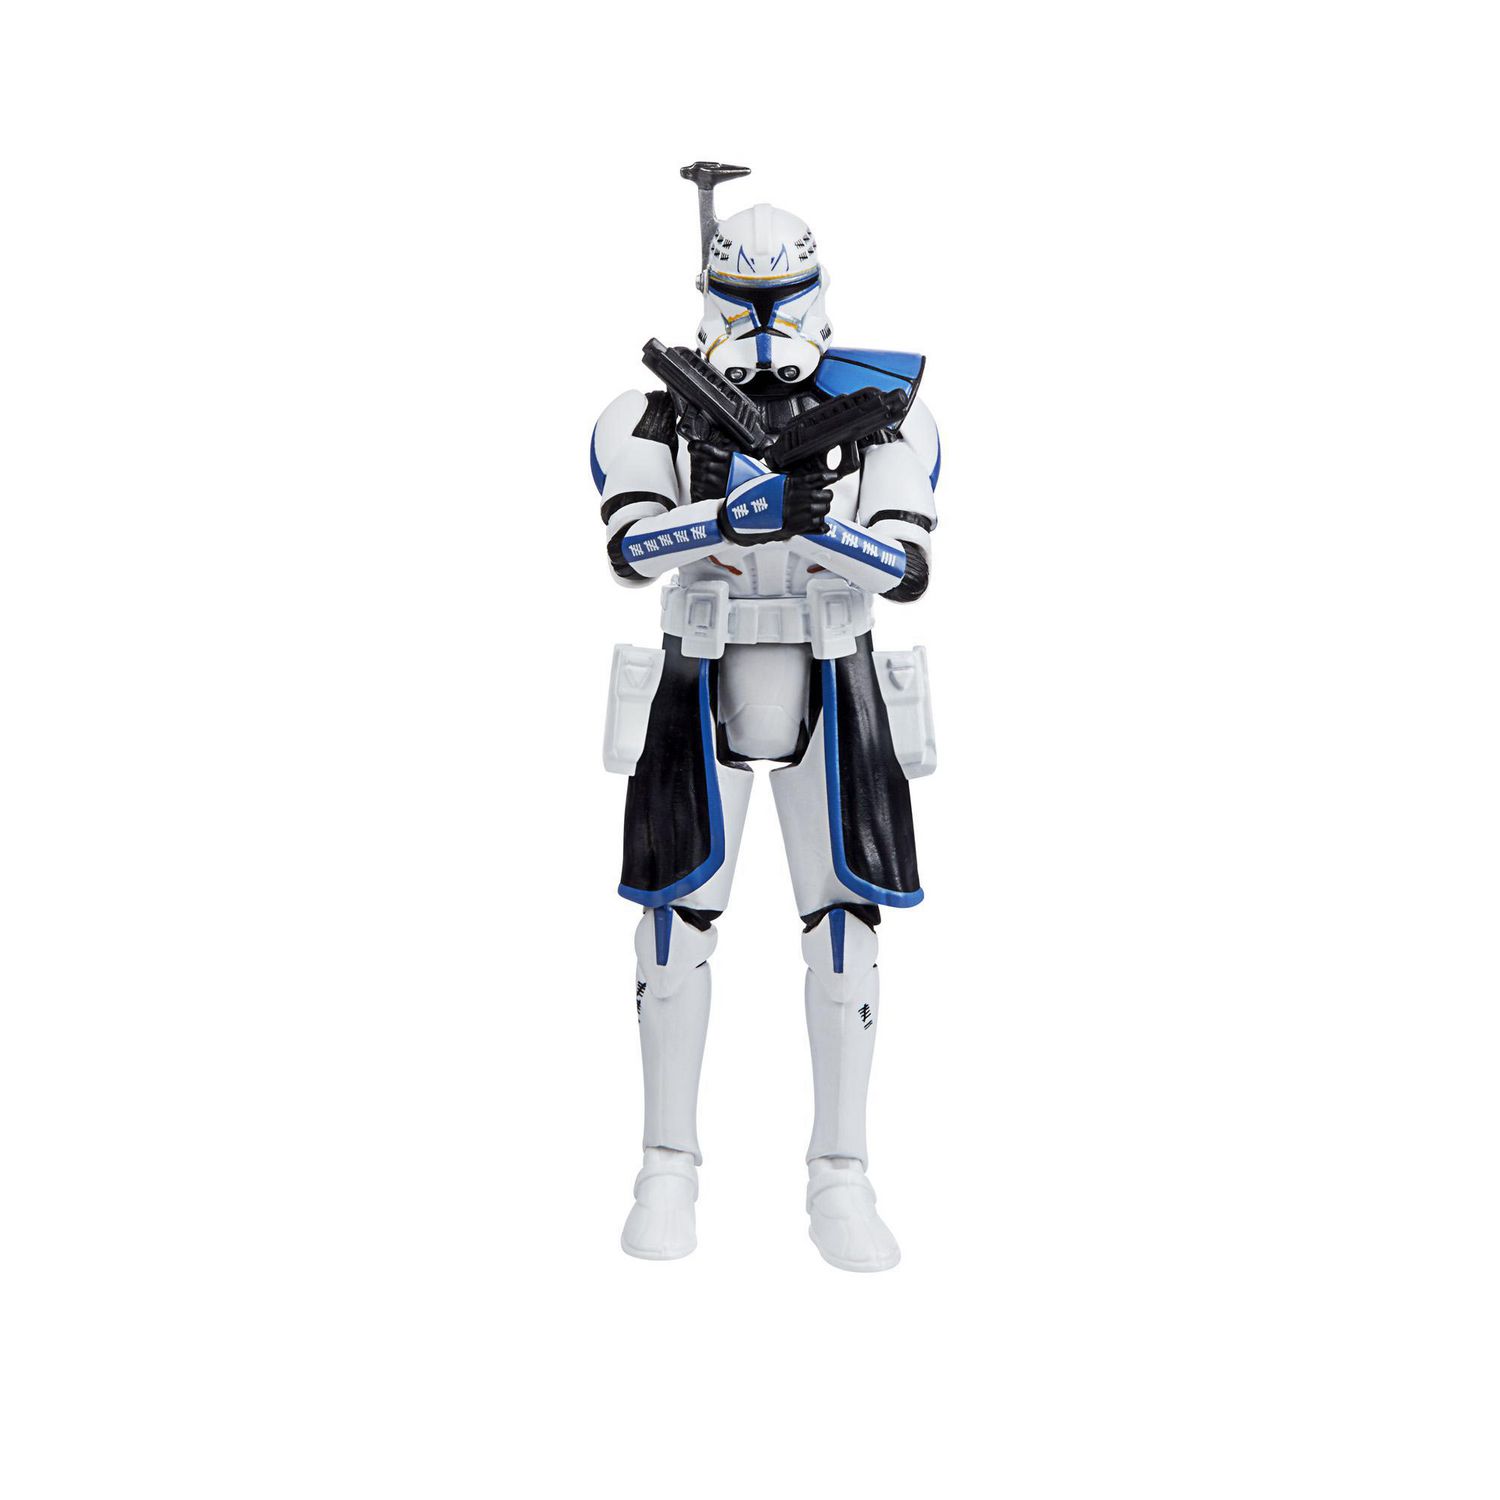 Star Wars The Vintage Collection Captain Rex Toy, 3.75-Inch-Scale Star  Wars: The Clone Wars Action Figure, Toys for Kids Ages 4 and Up